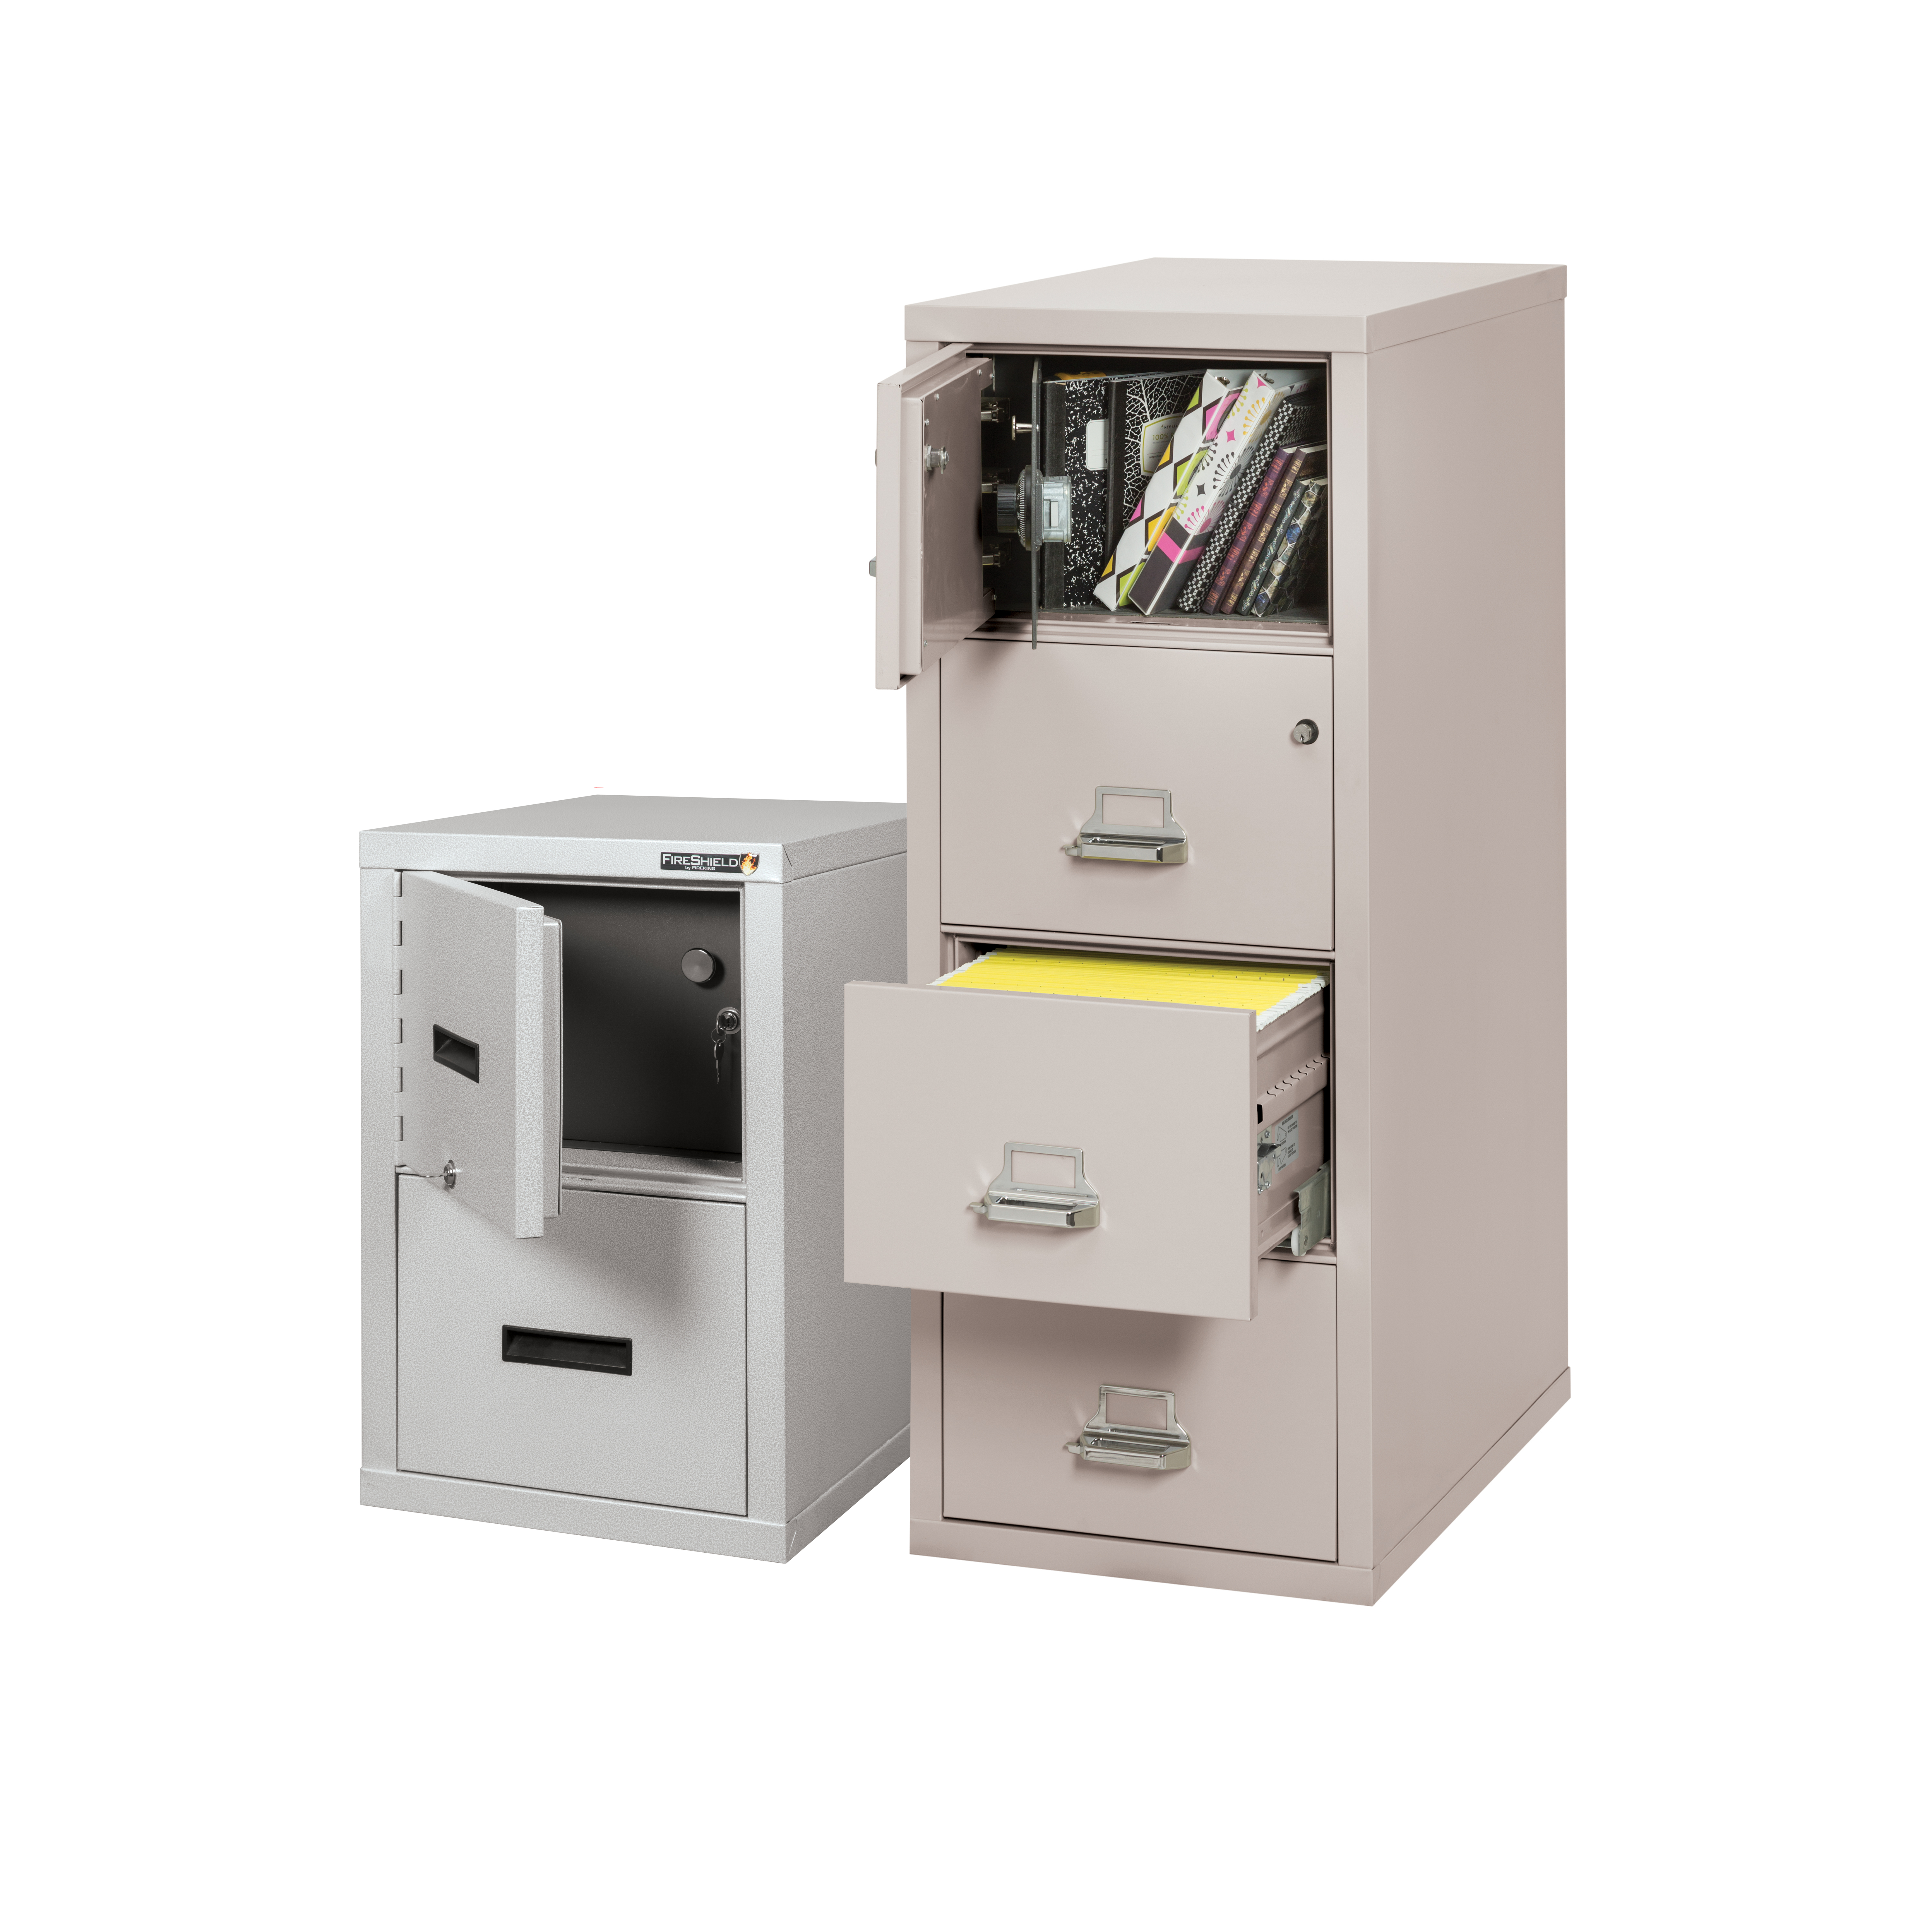 Safe In A File Cabinets Fireking Security Group intended for dimensions 6600 X 6600